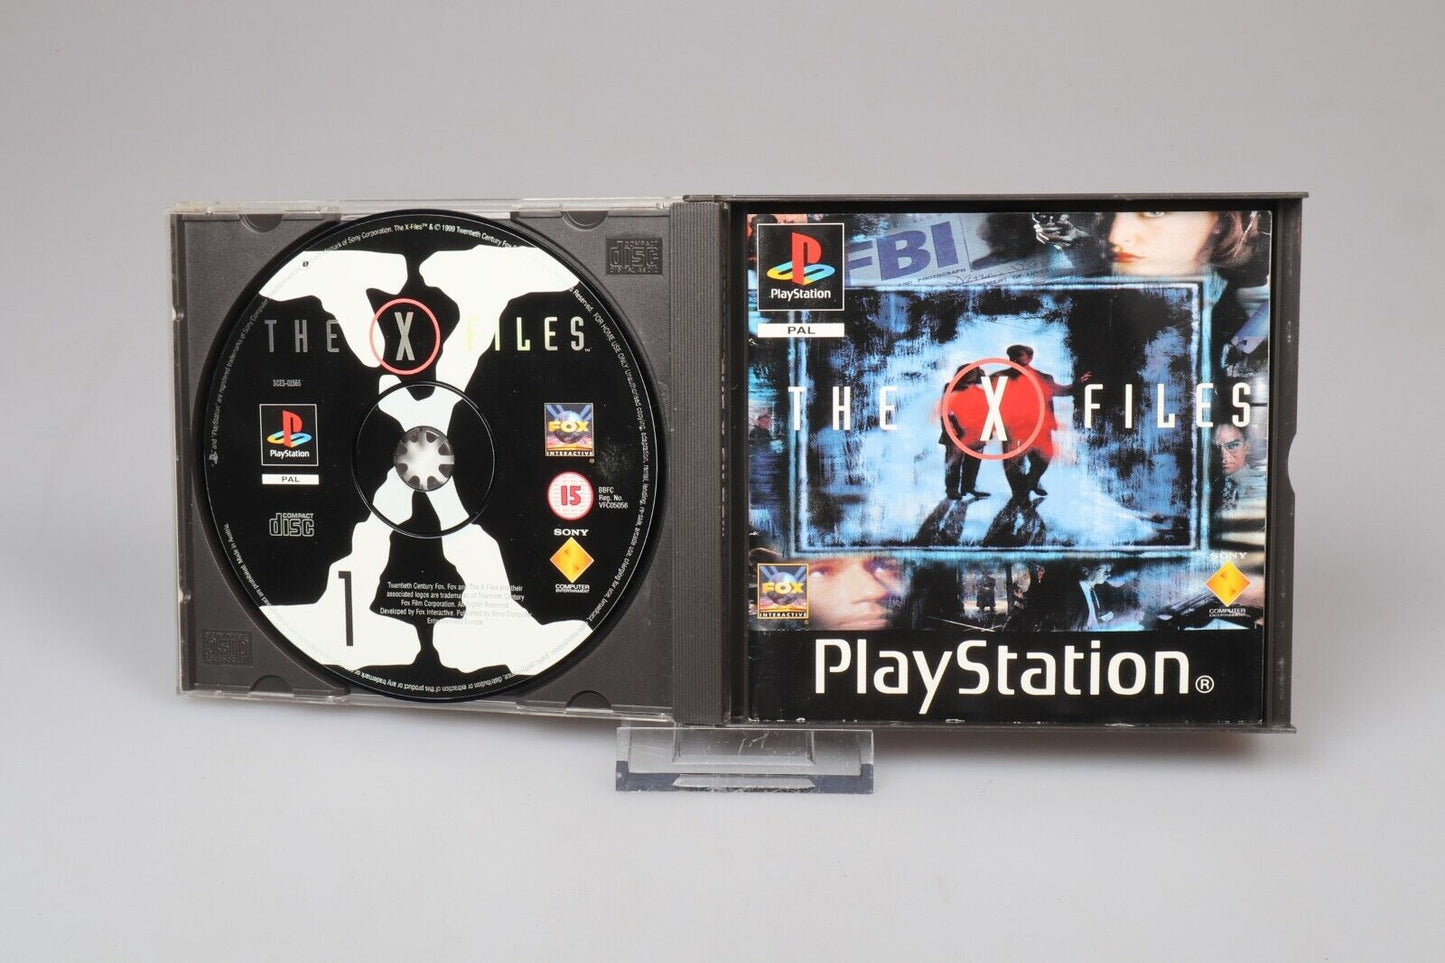 PS1 | The X Files (PAL) (NL)